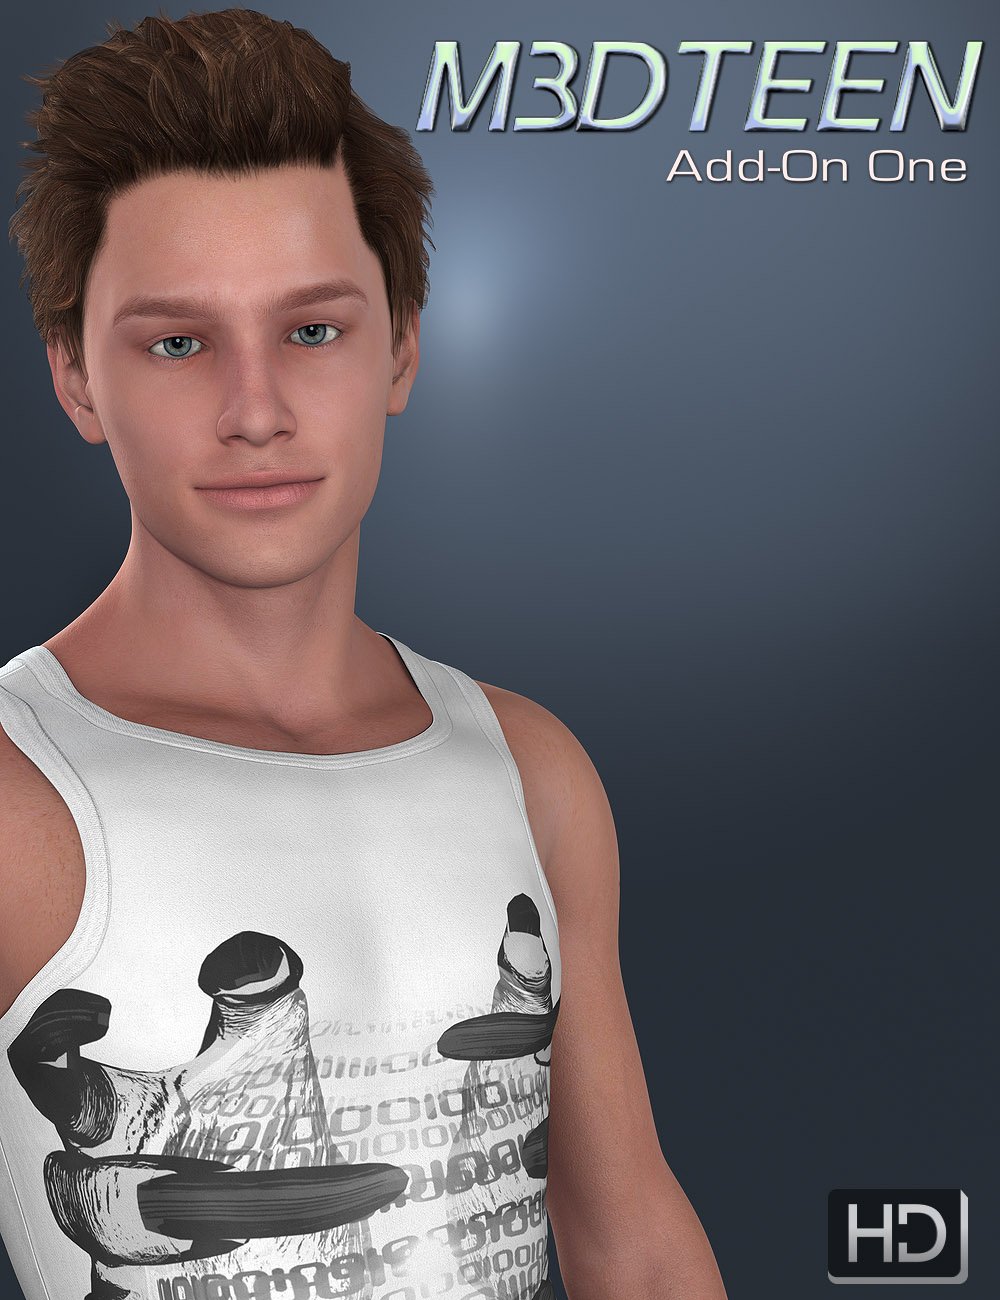 M3DTeen HD Add-on One by: Male-M3dia, 3D Models by Daz 3D